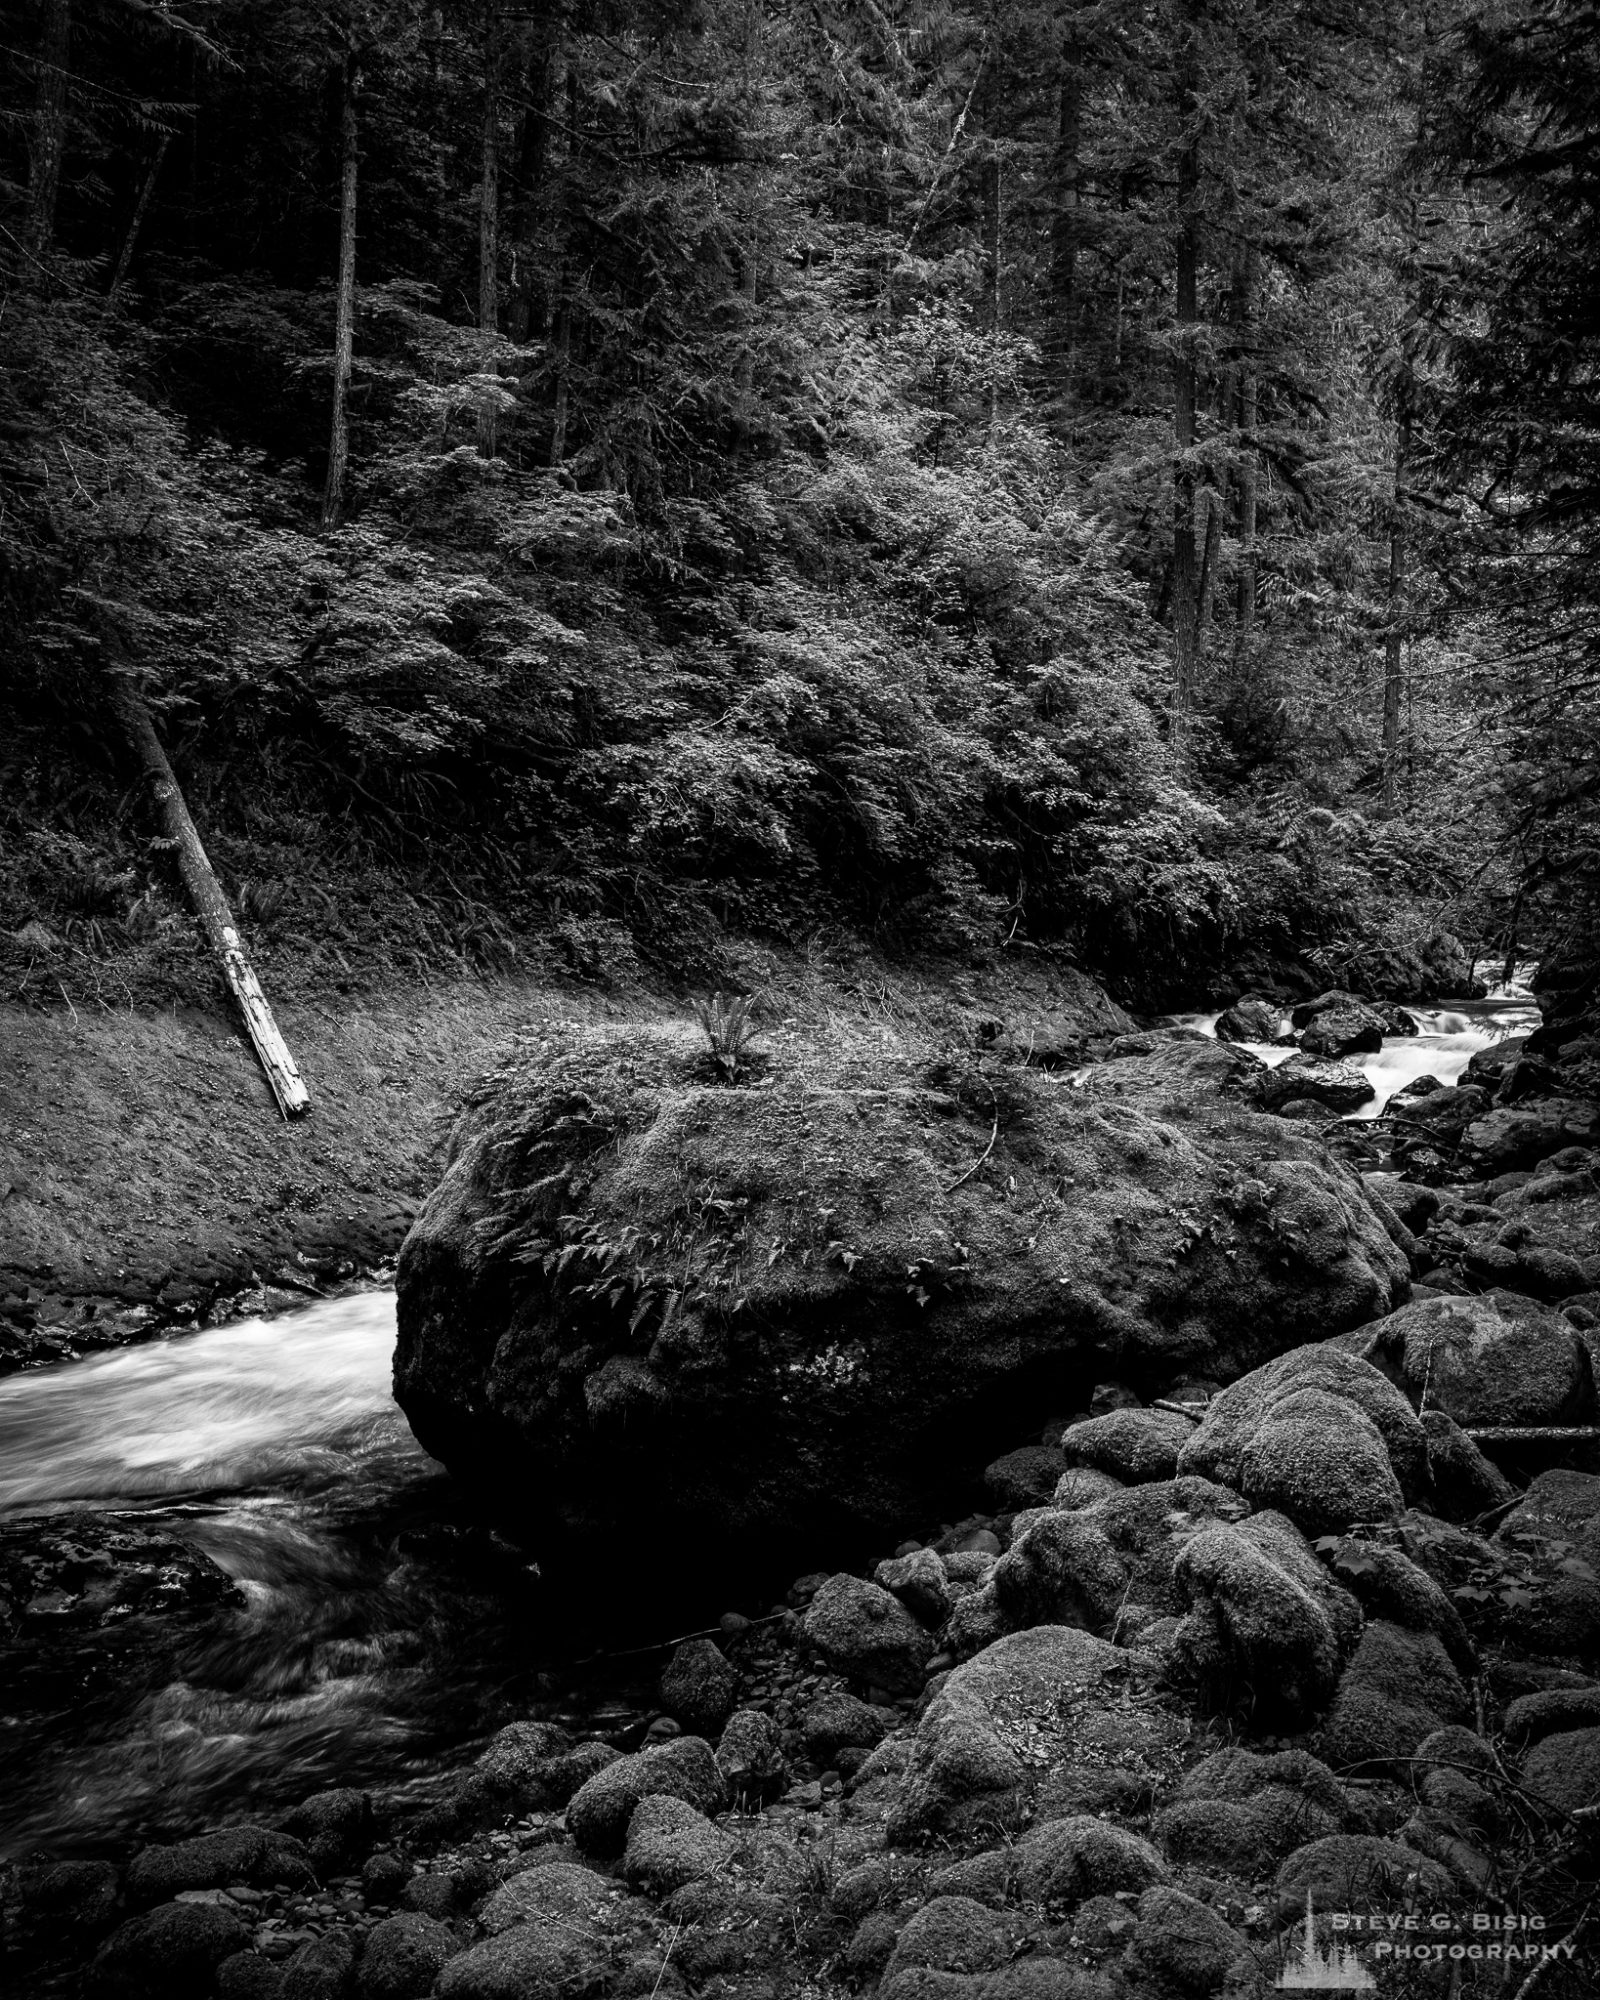 A black and white landscape photograph of moss-covered rocks in a stream bed found along Forest Road 52 (Skate Creek Road) in the Gifford Pinchot National Forest, Washington.